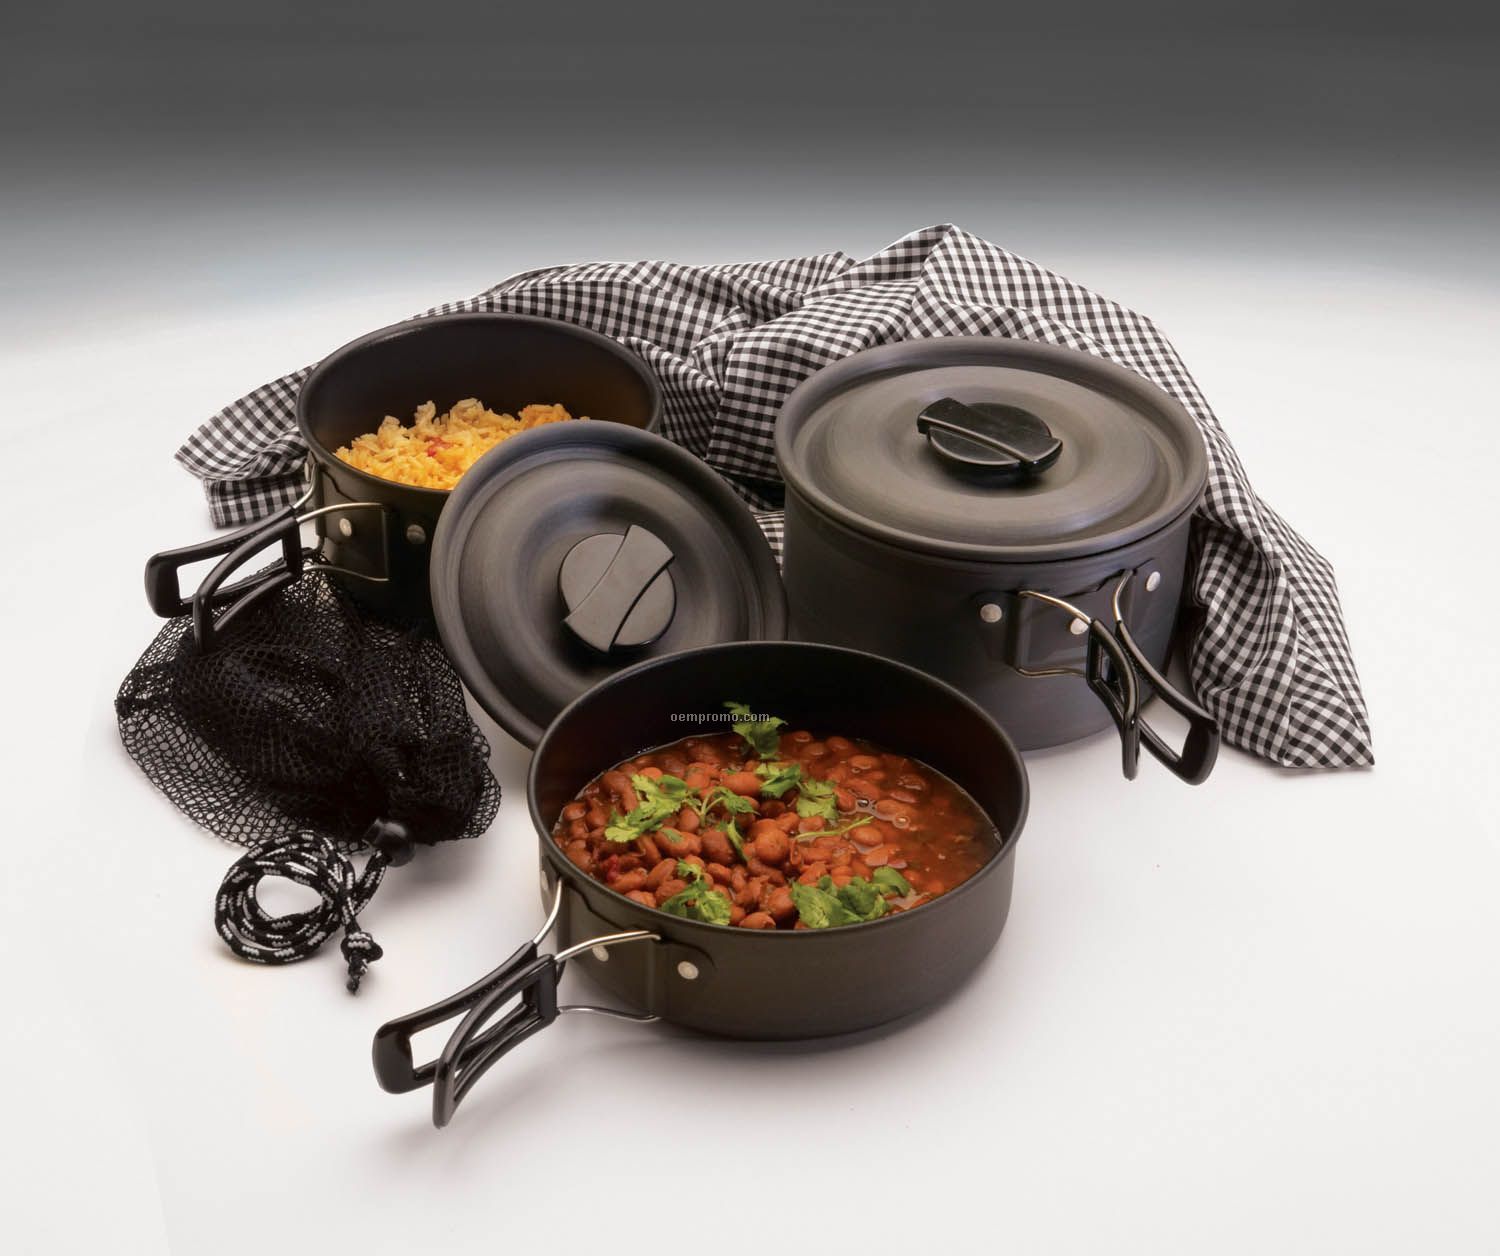 Texsport The Scouter Hard Anodized Cookware Set